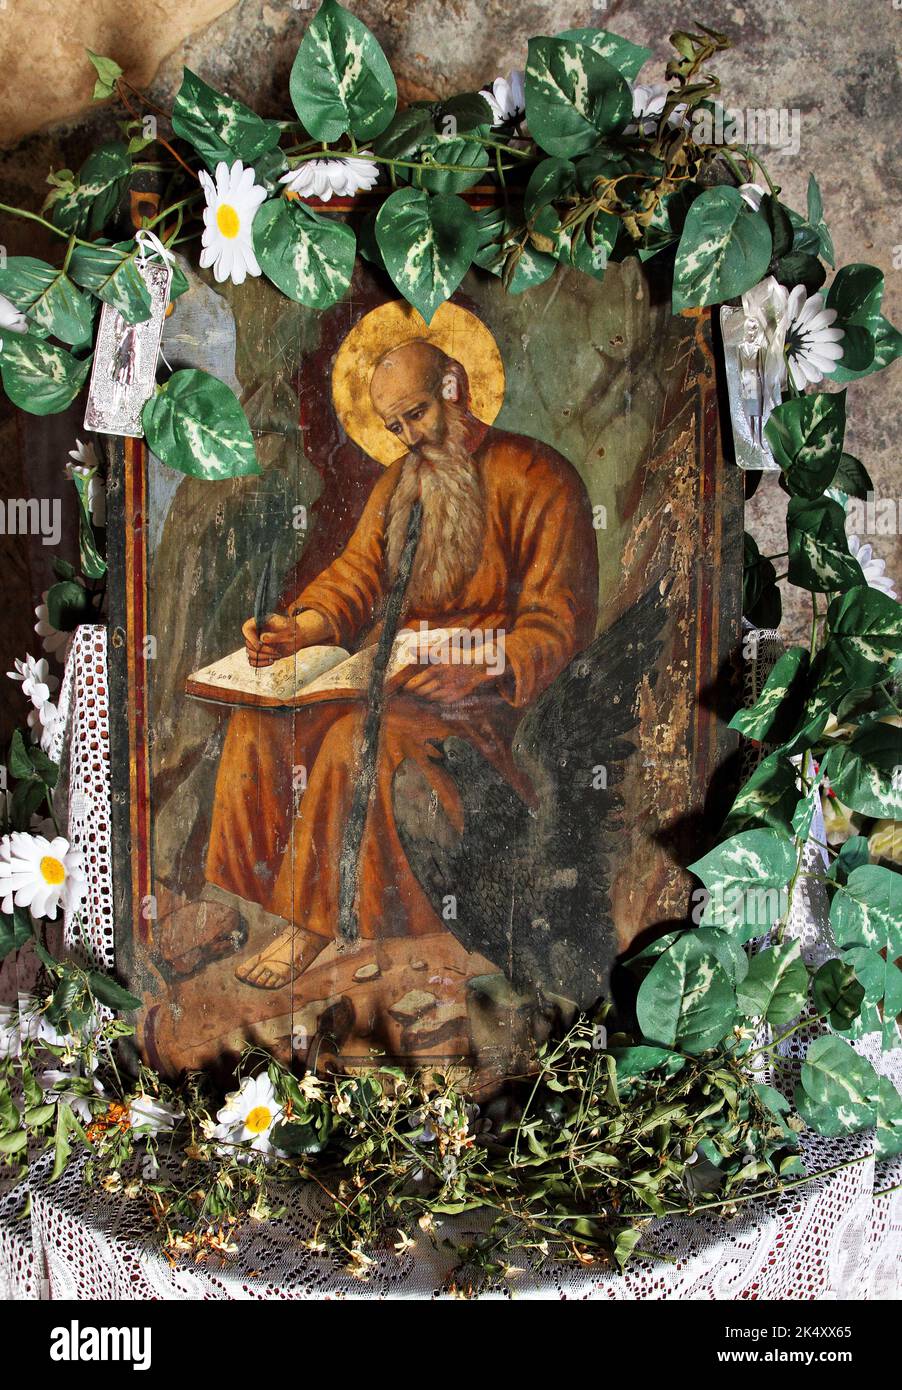 John the Evangelist writing the Apocalypse, as depicted at a Greek orthodox icon, at an orthodox monastery in Crete island, Greece, Europe Stock Photo